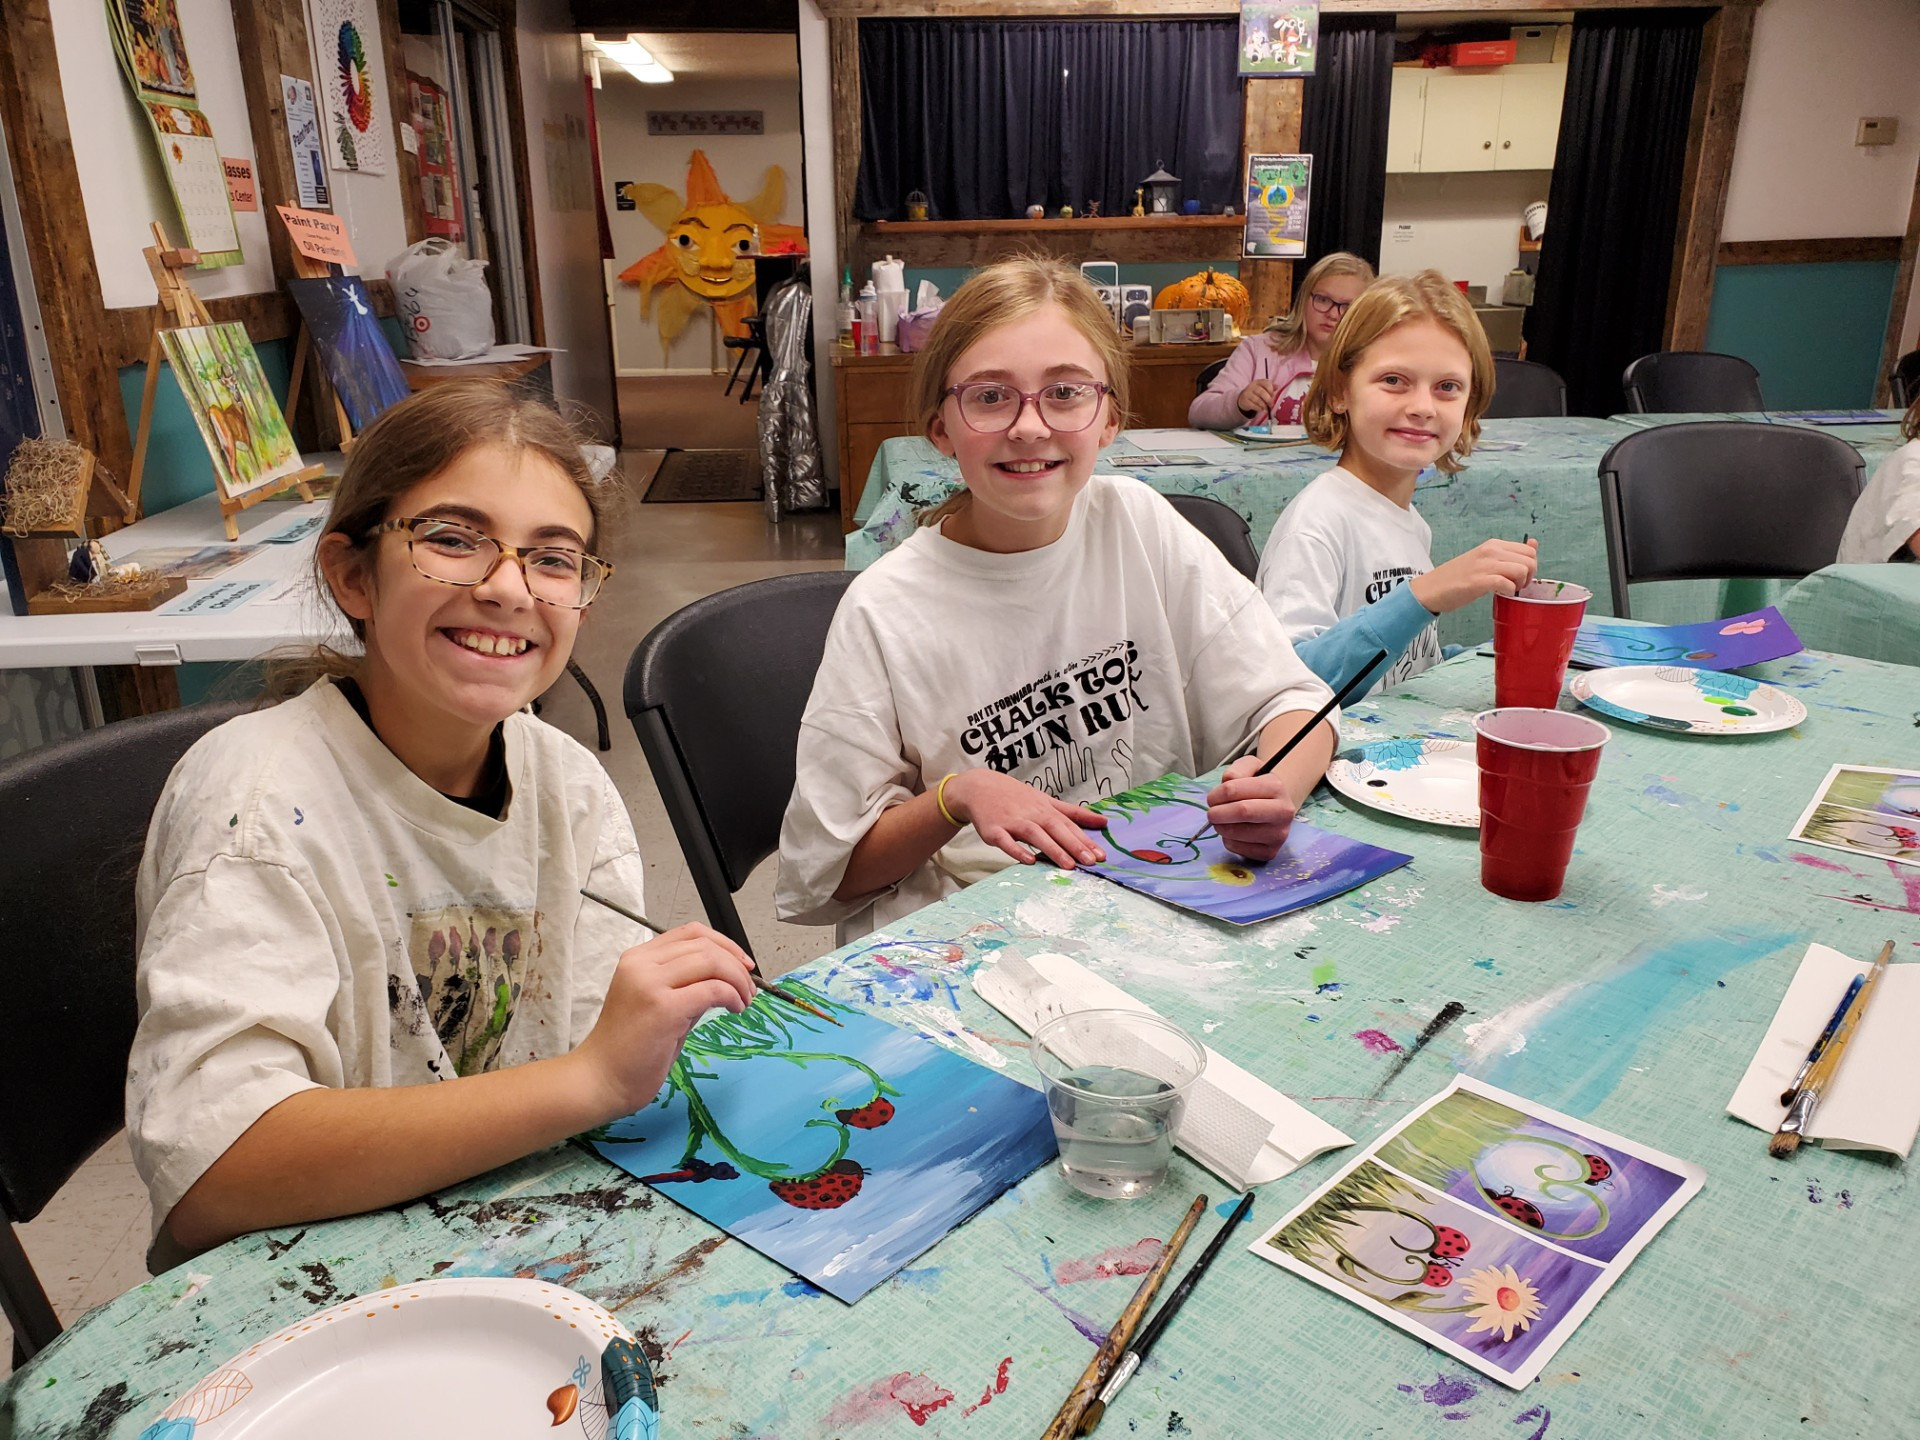 Kids Art Classes, Camps, Parties and Events - Small Hands Big Art